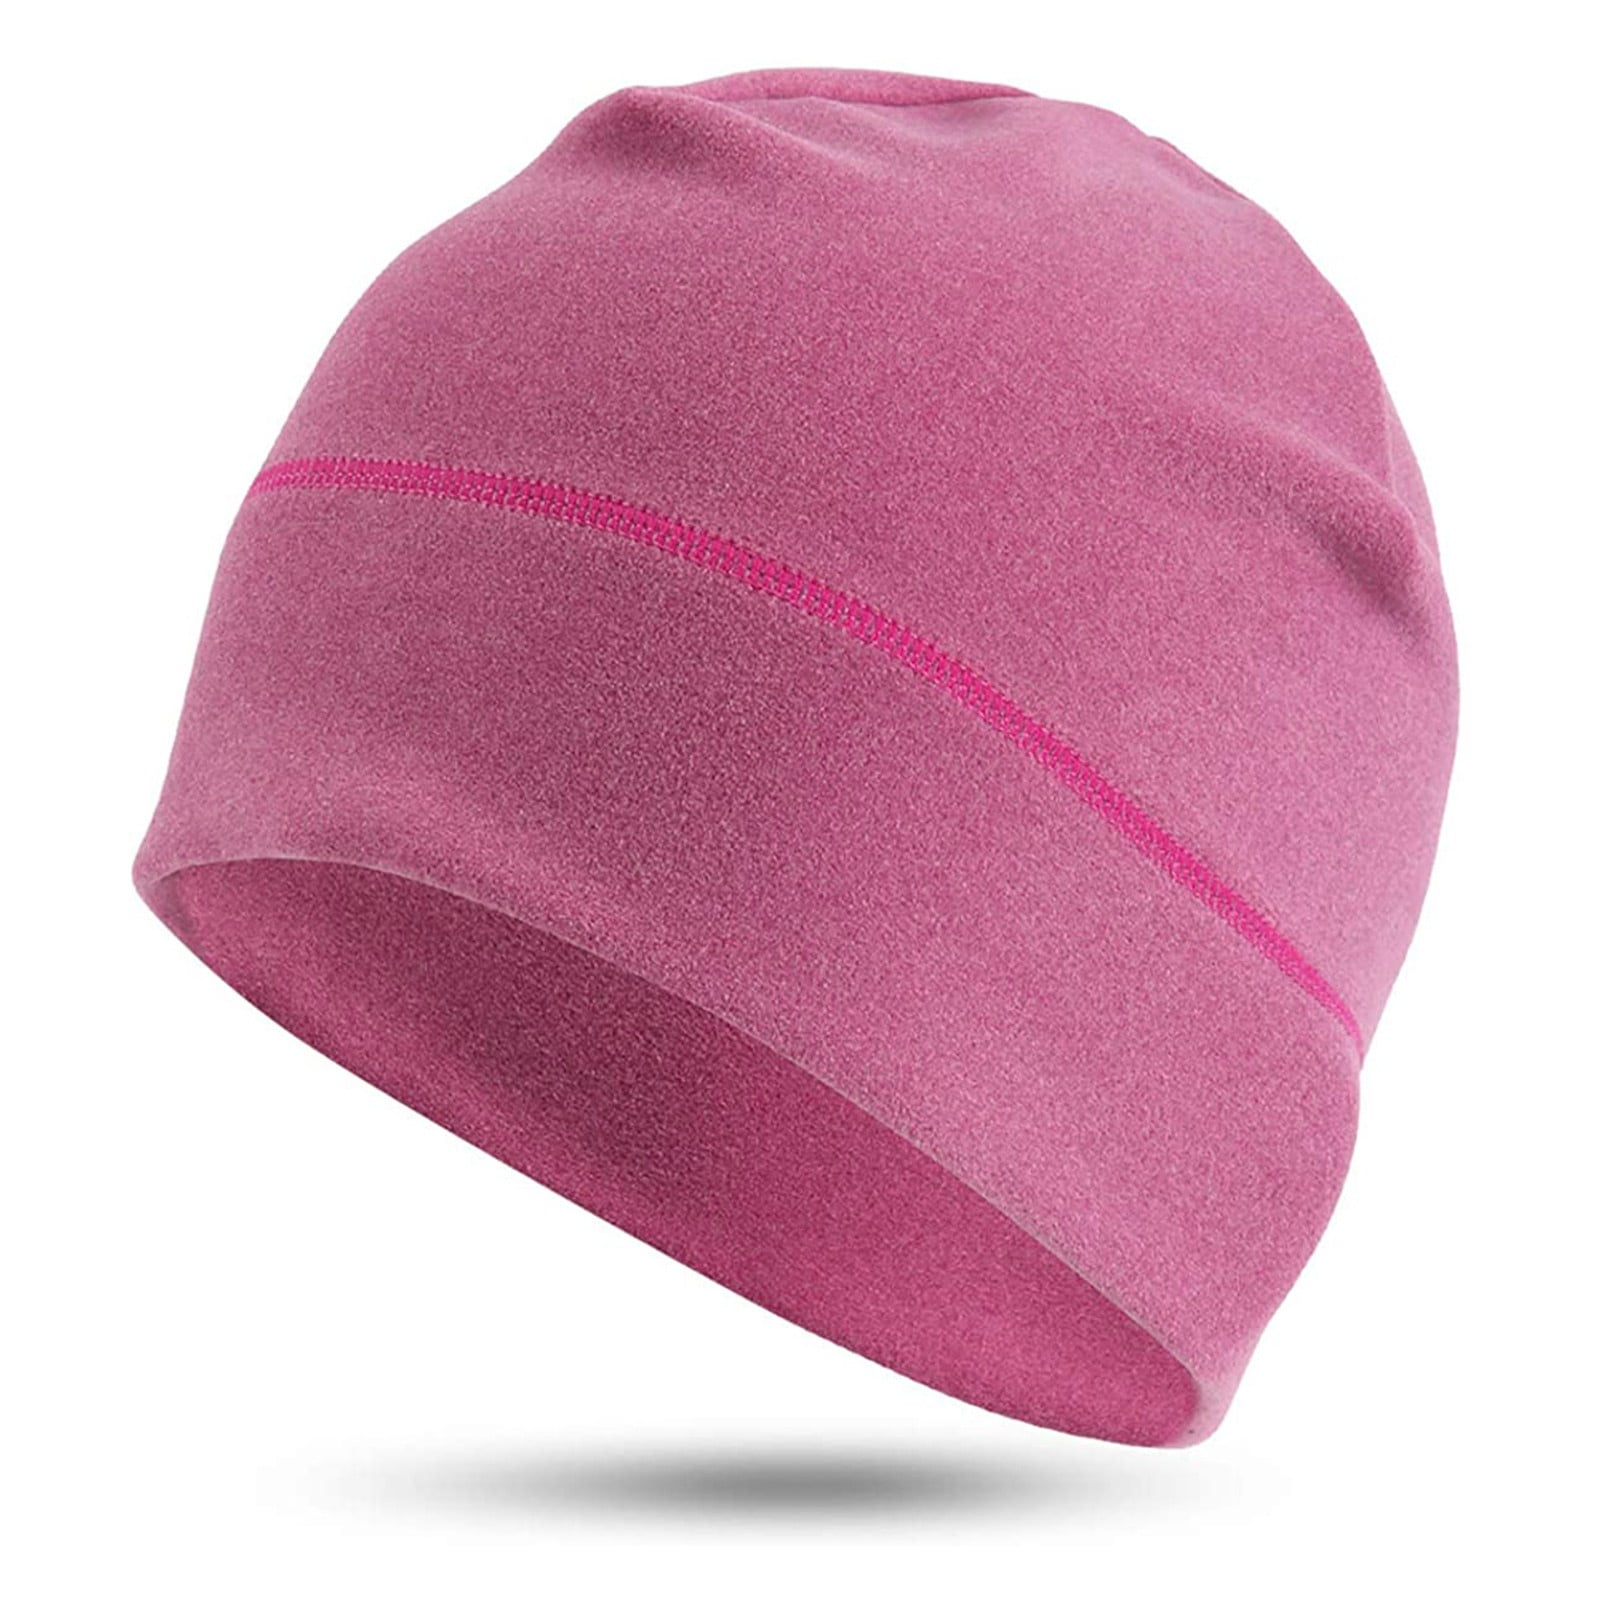 Round Cap Thermal Cycling Beanie Running Hat Warm Waterproof Absorbent 